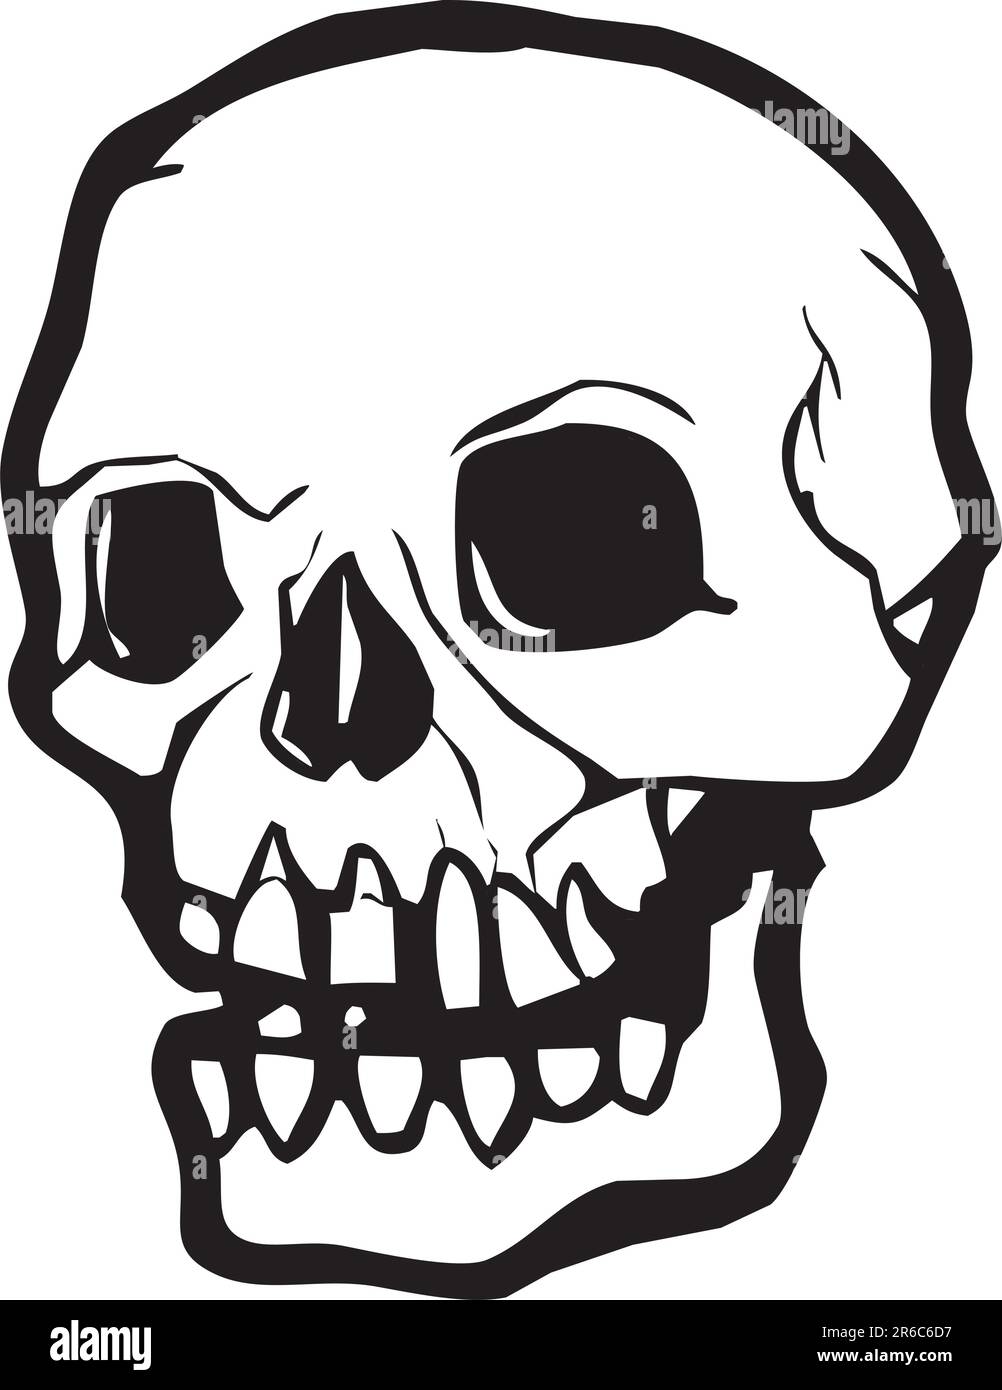 Simple image of a human skull in black and white. Stock Vector